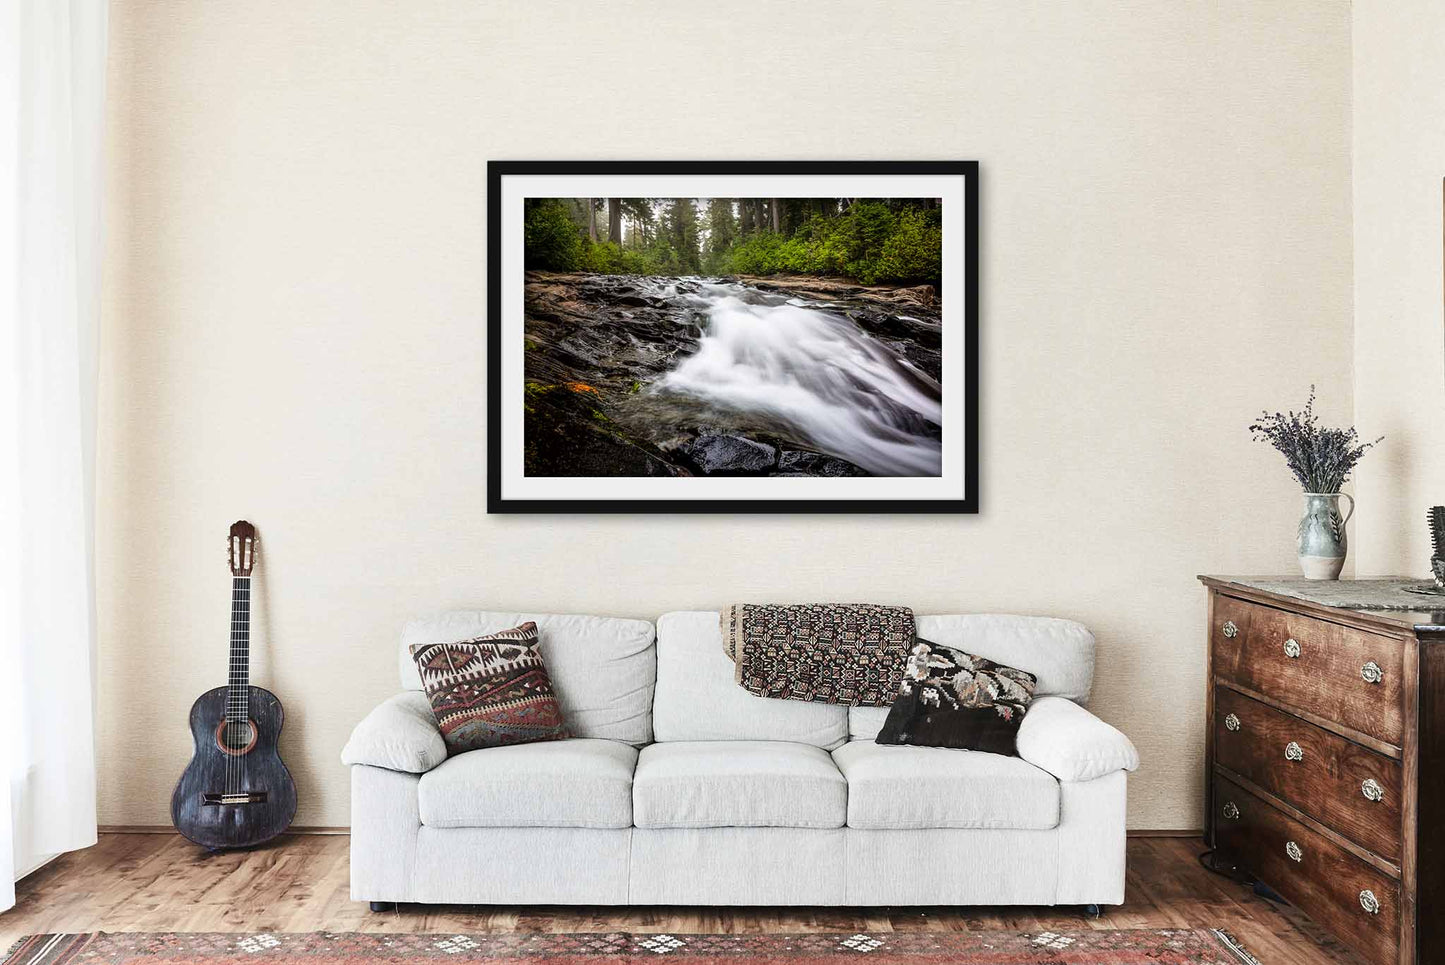 Framed and Matted Print- Picture of Paradise River Rushing to Narada Falls in Washington Mount Rainier National Park Wall Art Pacific Northwest Decor